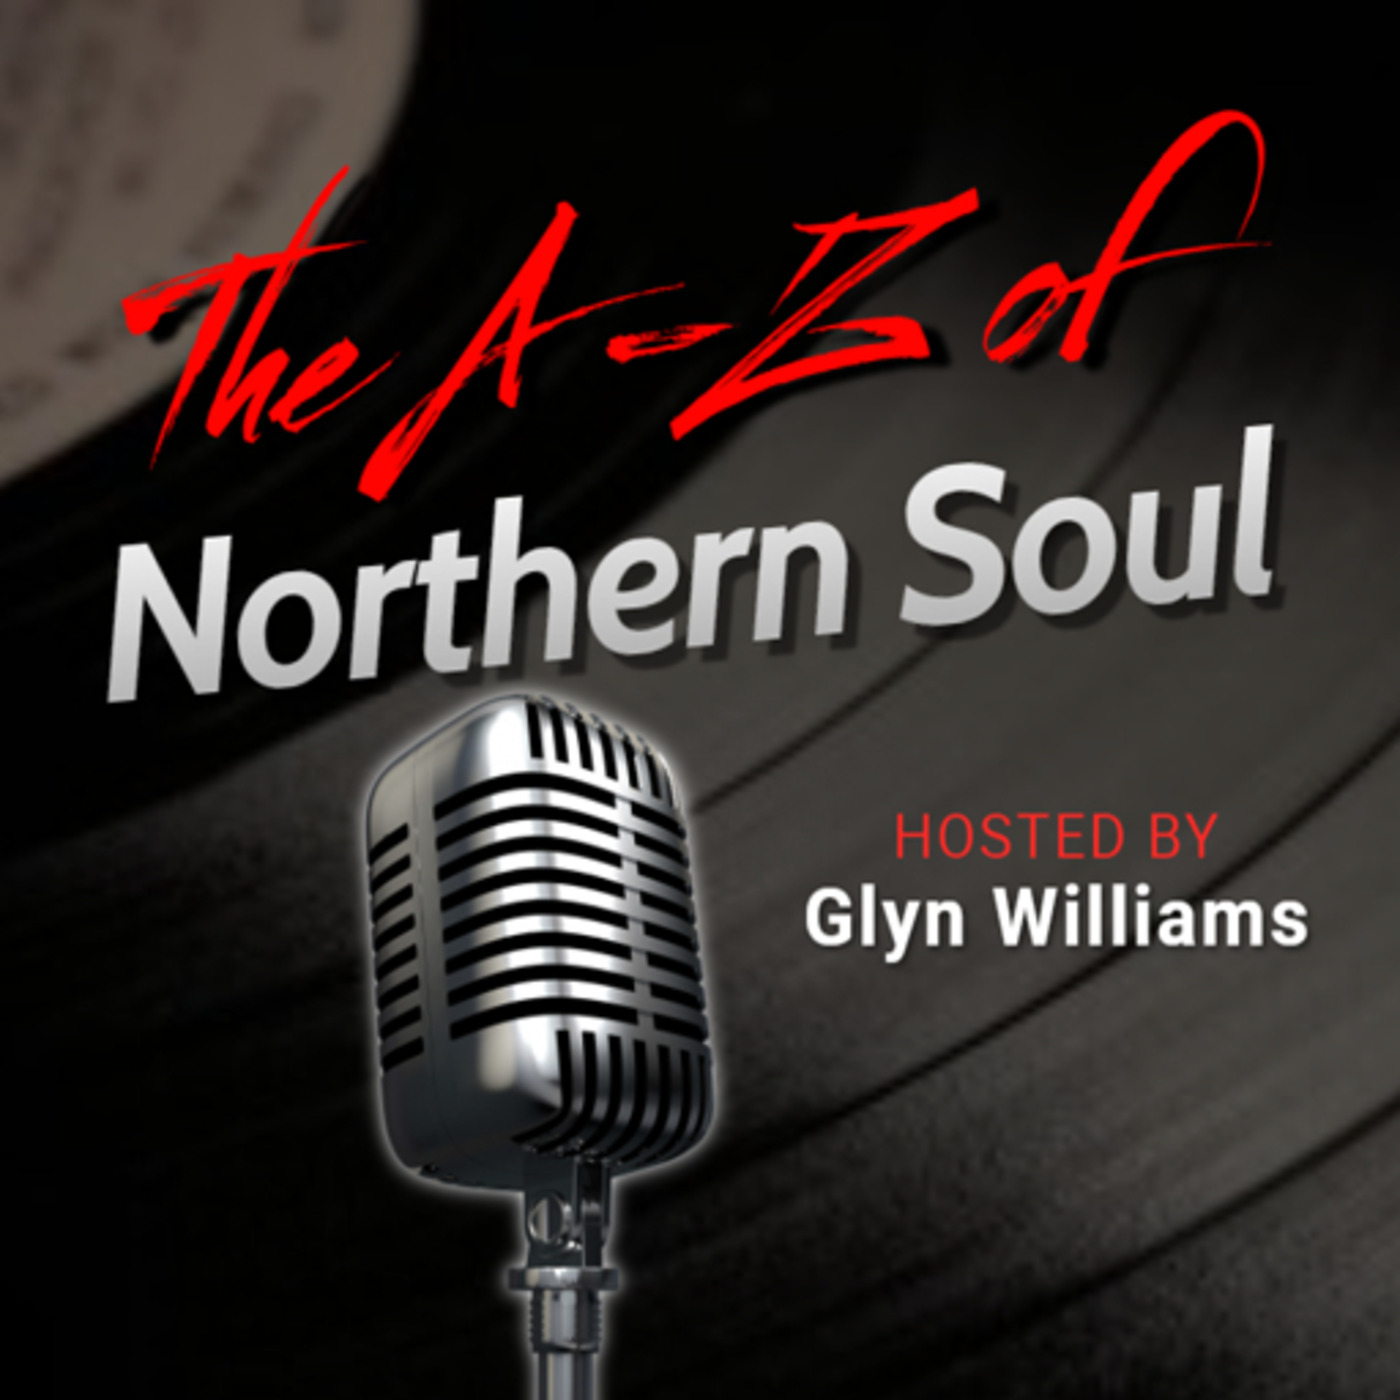 The A-Z of Northern Soul E069